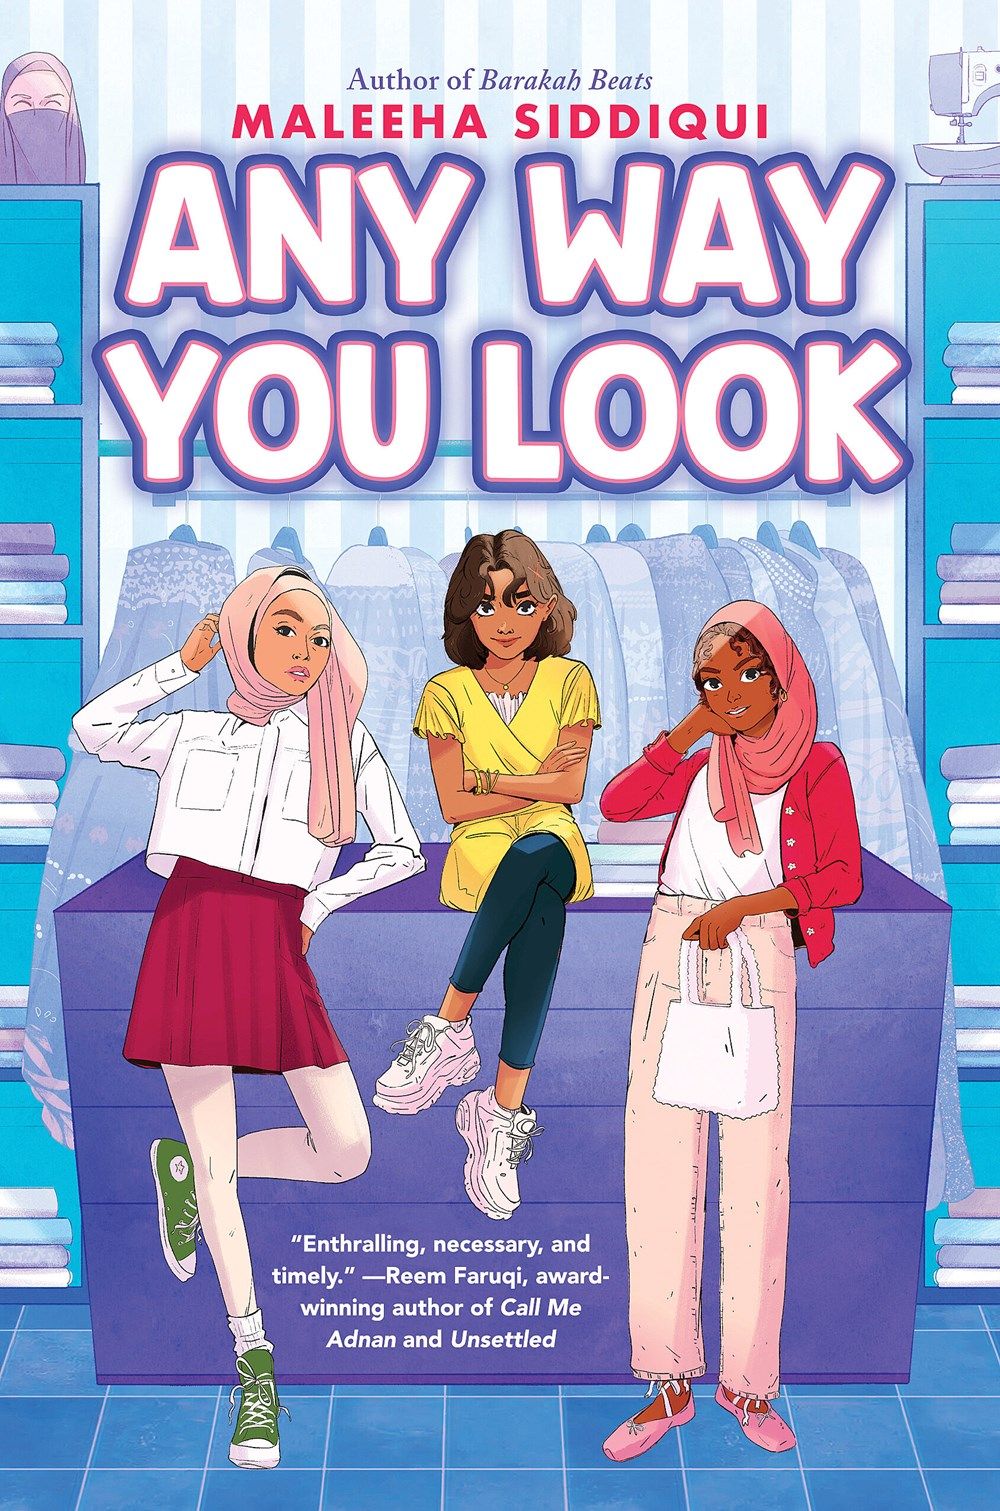 Cover of Any Way You Look by Maleeha Siddiqui